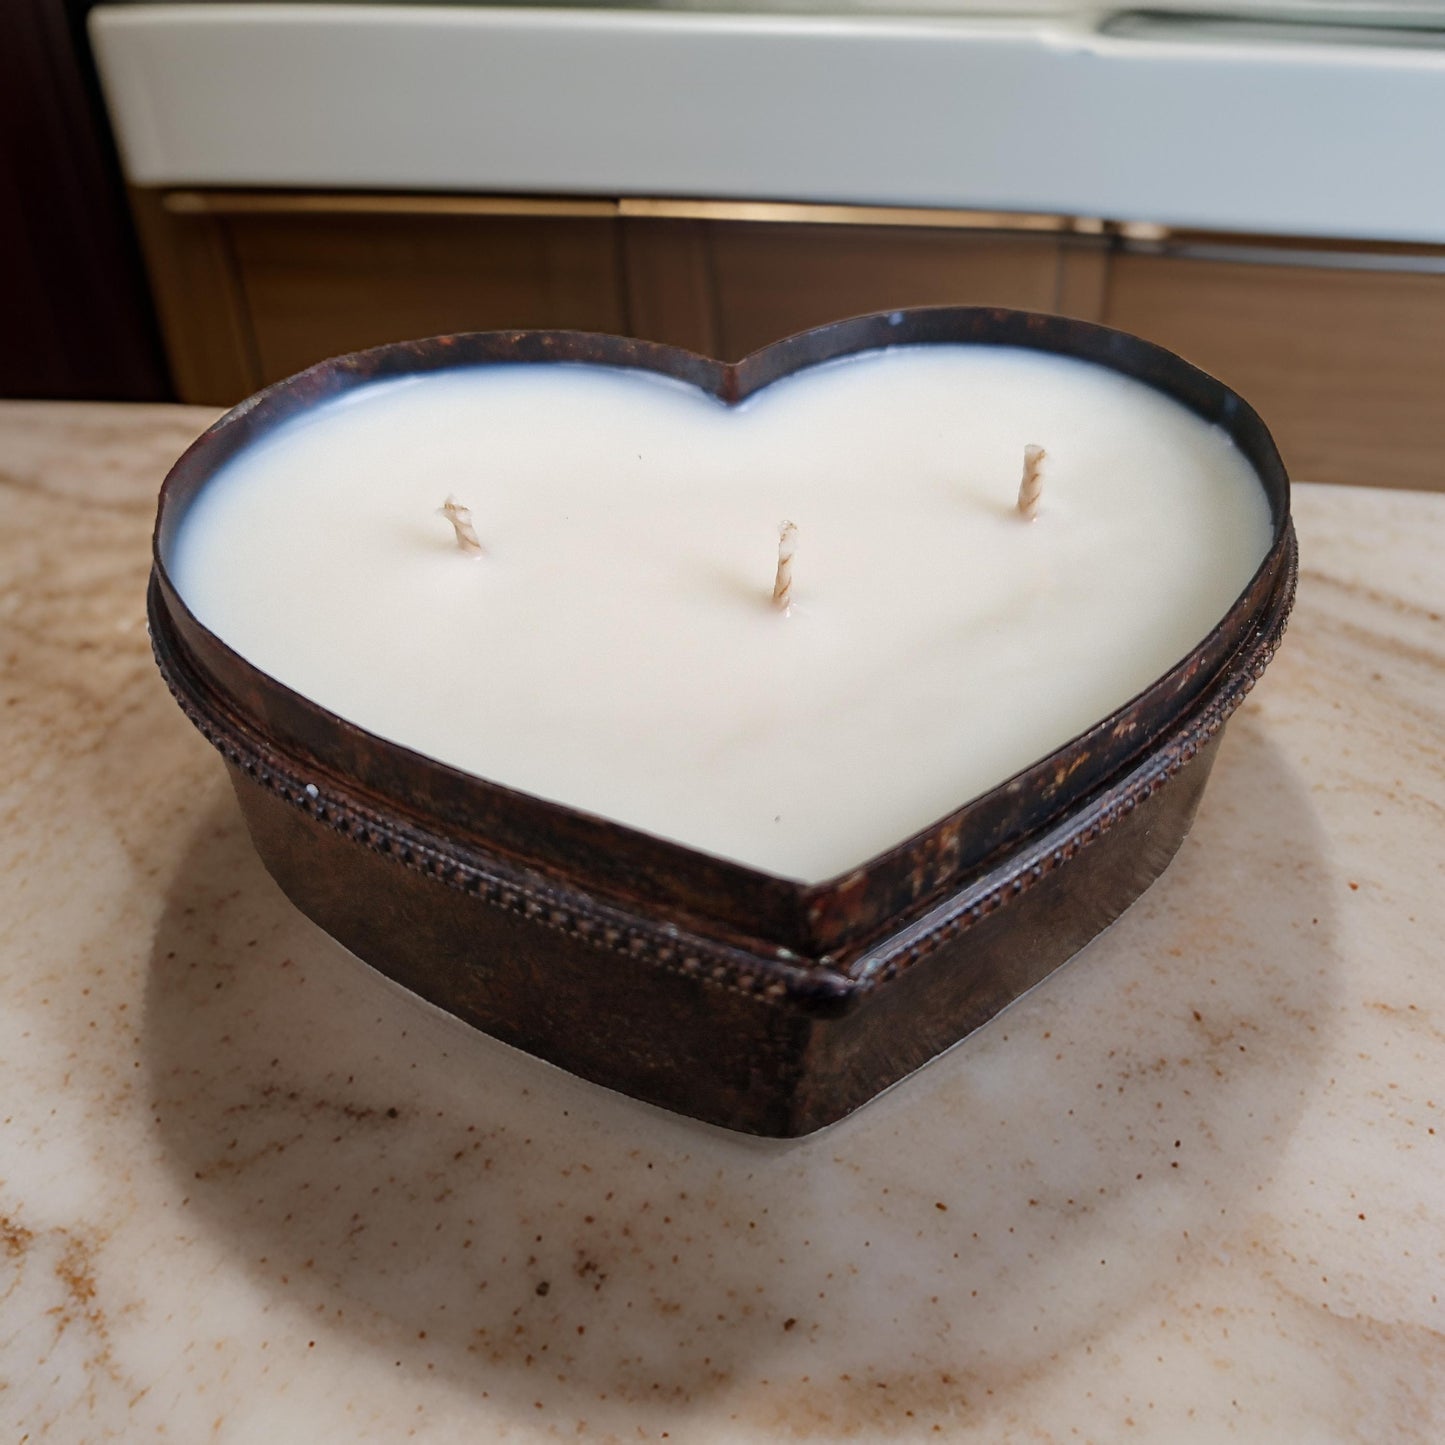 Heart shaped candle